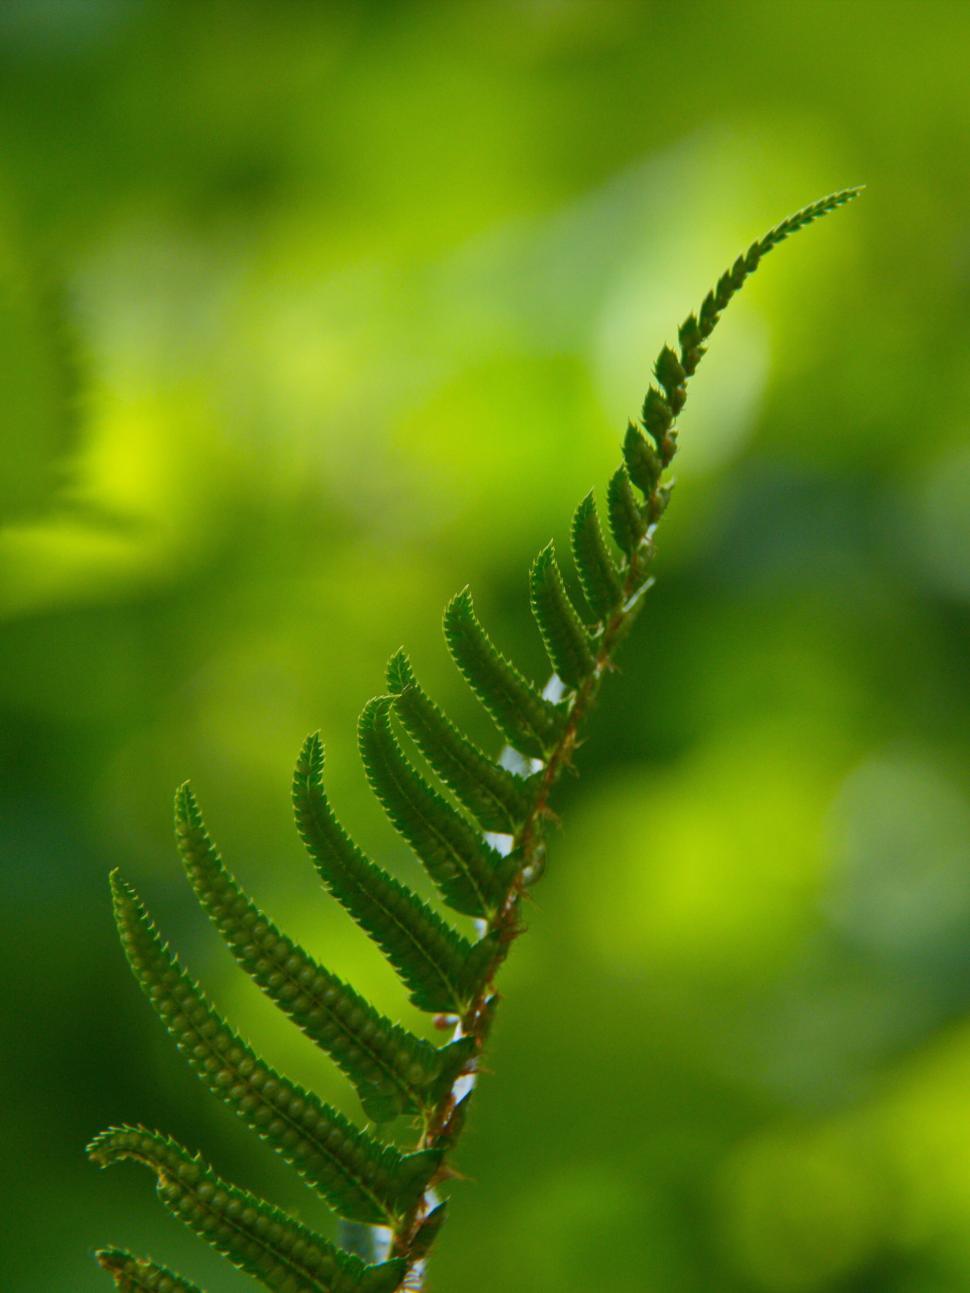 Free Image of Fern Leaf Detail in a Soft Green Environment 